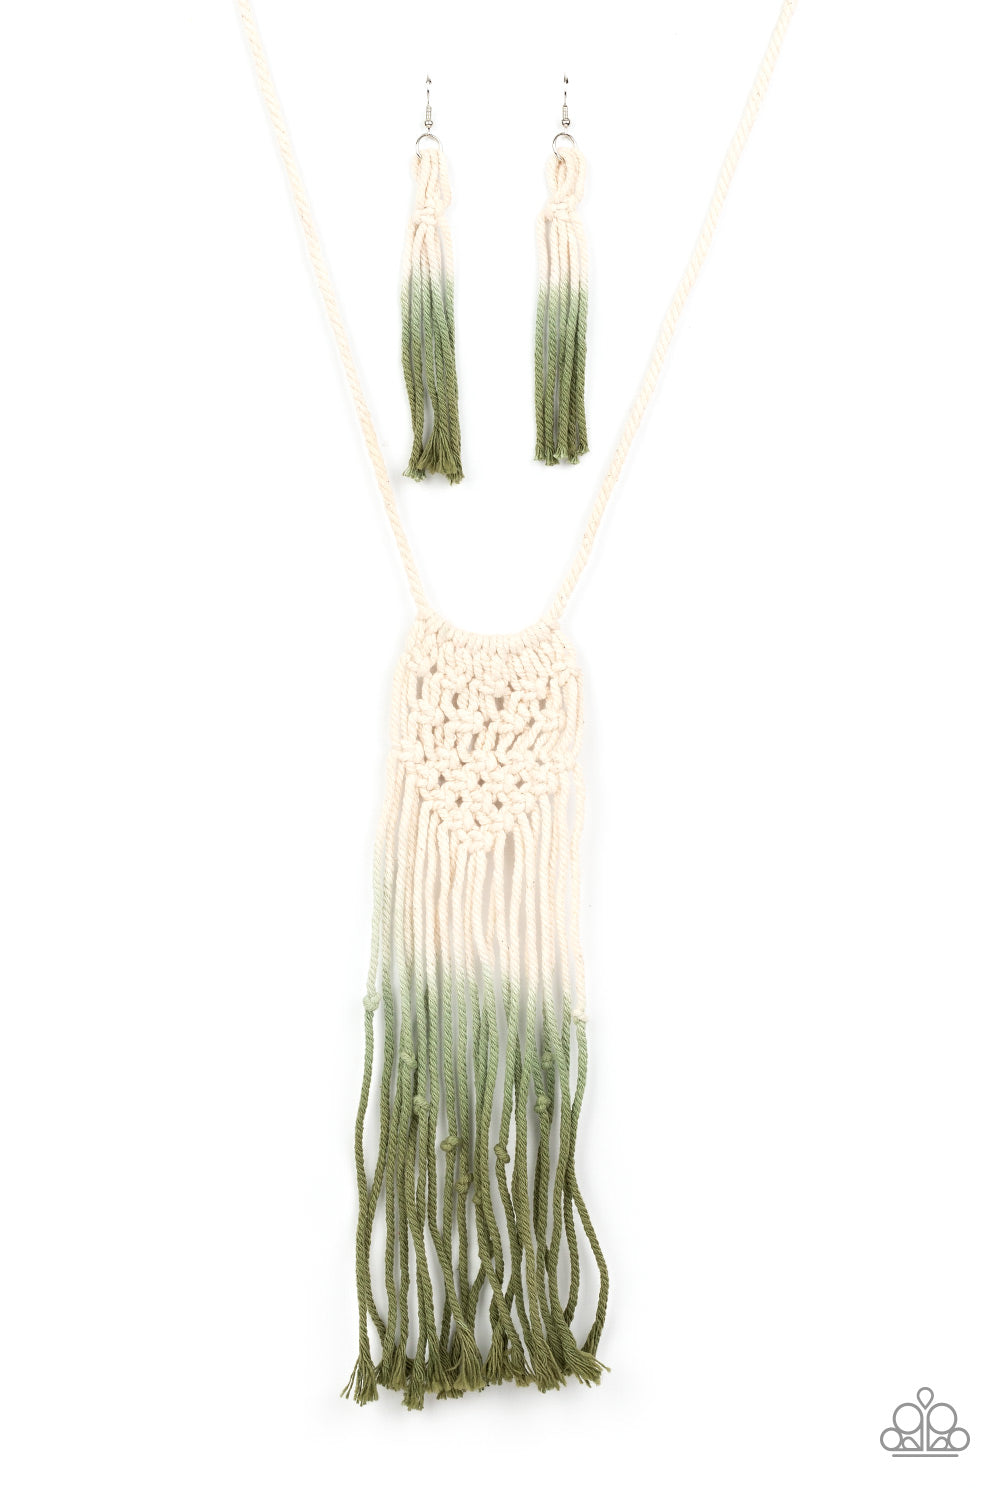 Gradually fading from white to Military Olive, strands of twine-like cording delicately knot in braid into a decorative macramé inspired pendant across the chest. Features an adjustable sliding knot closure